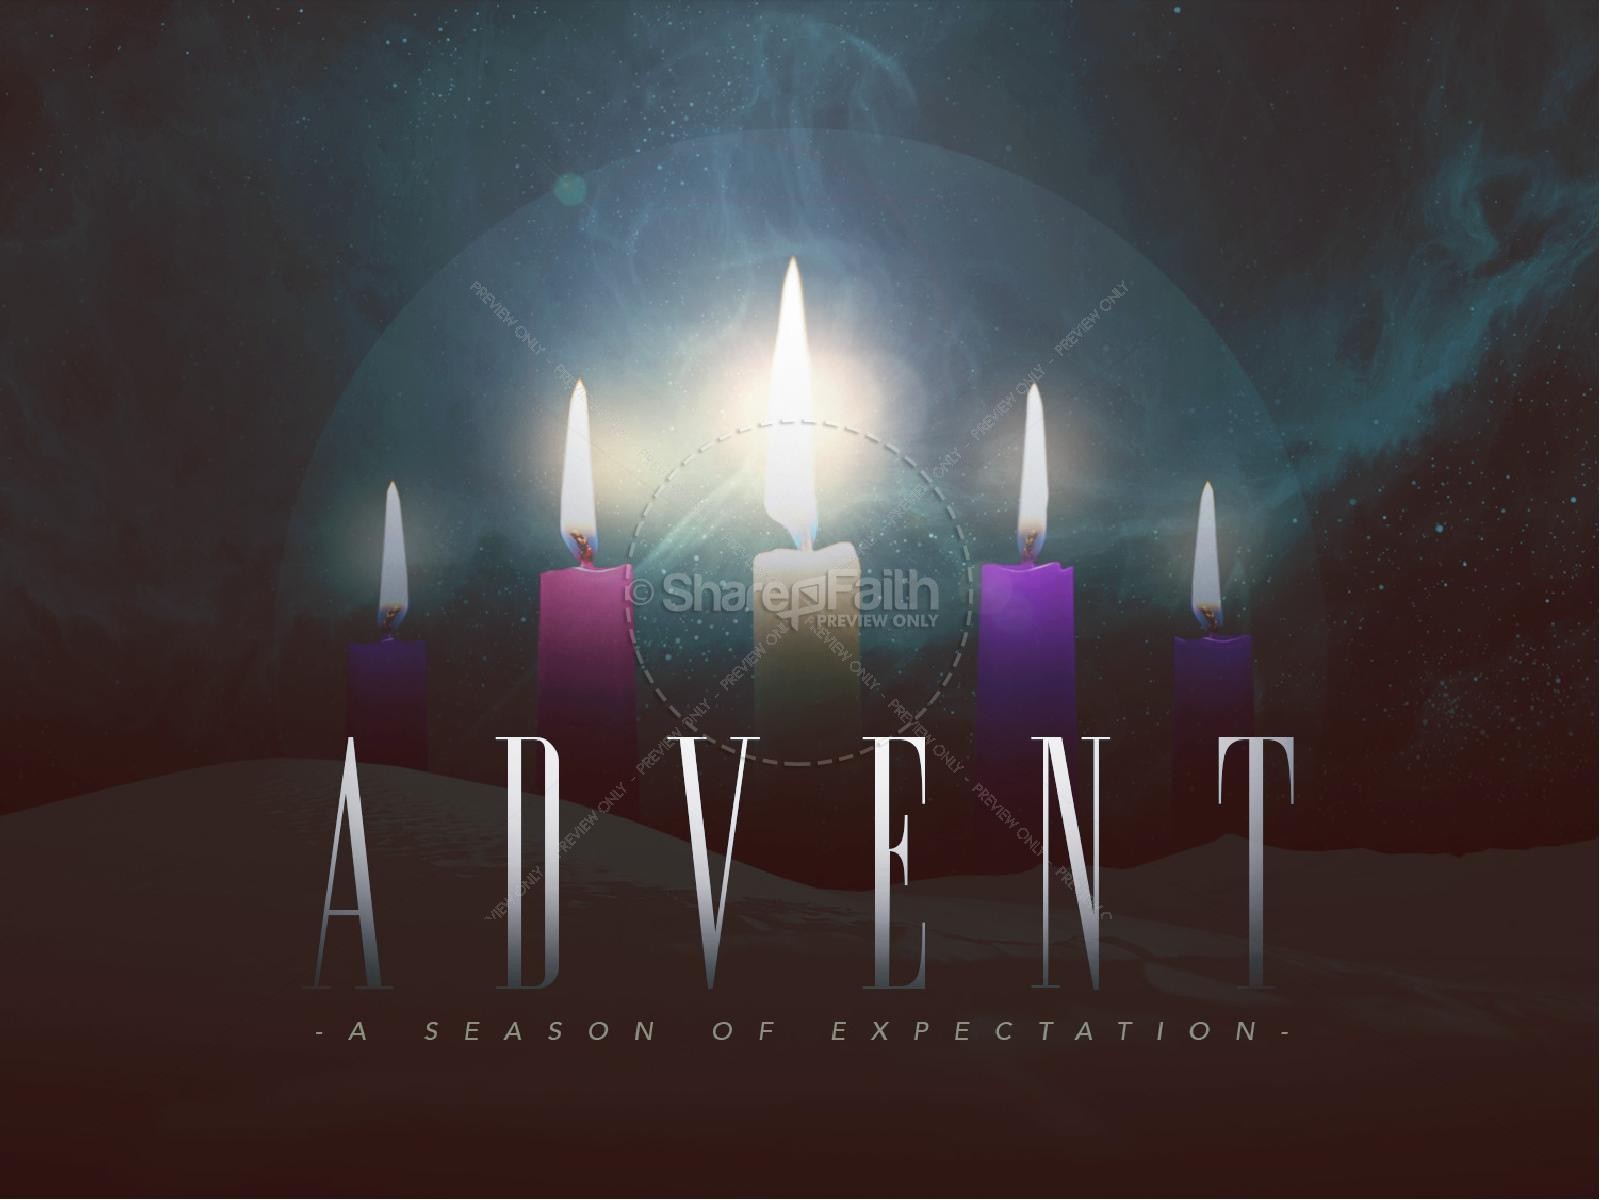 Advent Season of Expectation Ministry PowerPoint1600 x 1200